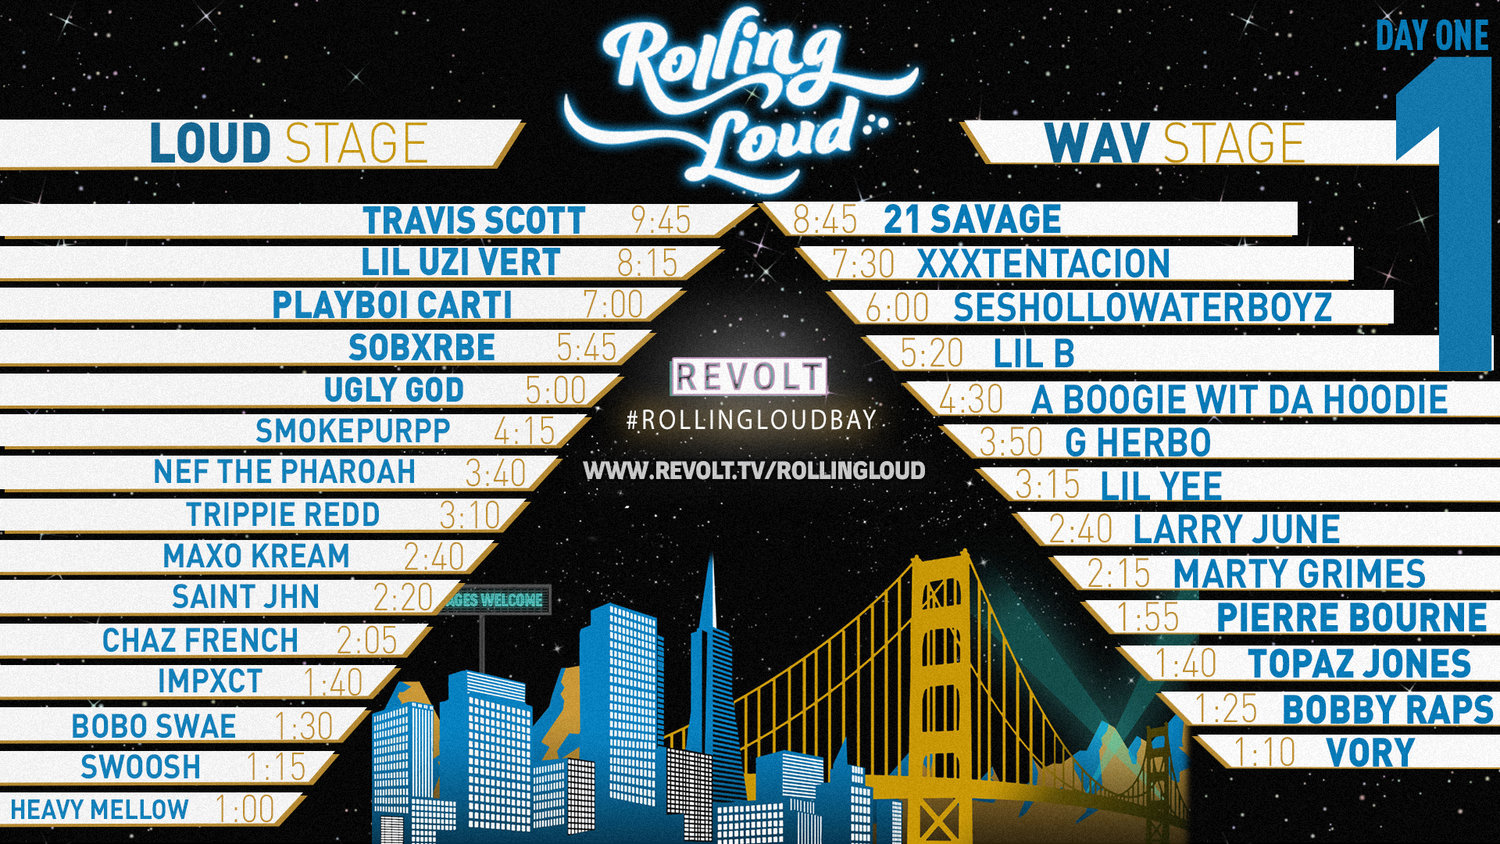 Watch Day 1 Live Stream of Rolling Loud Bay Area Festival.